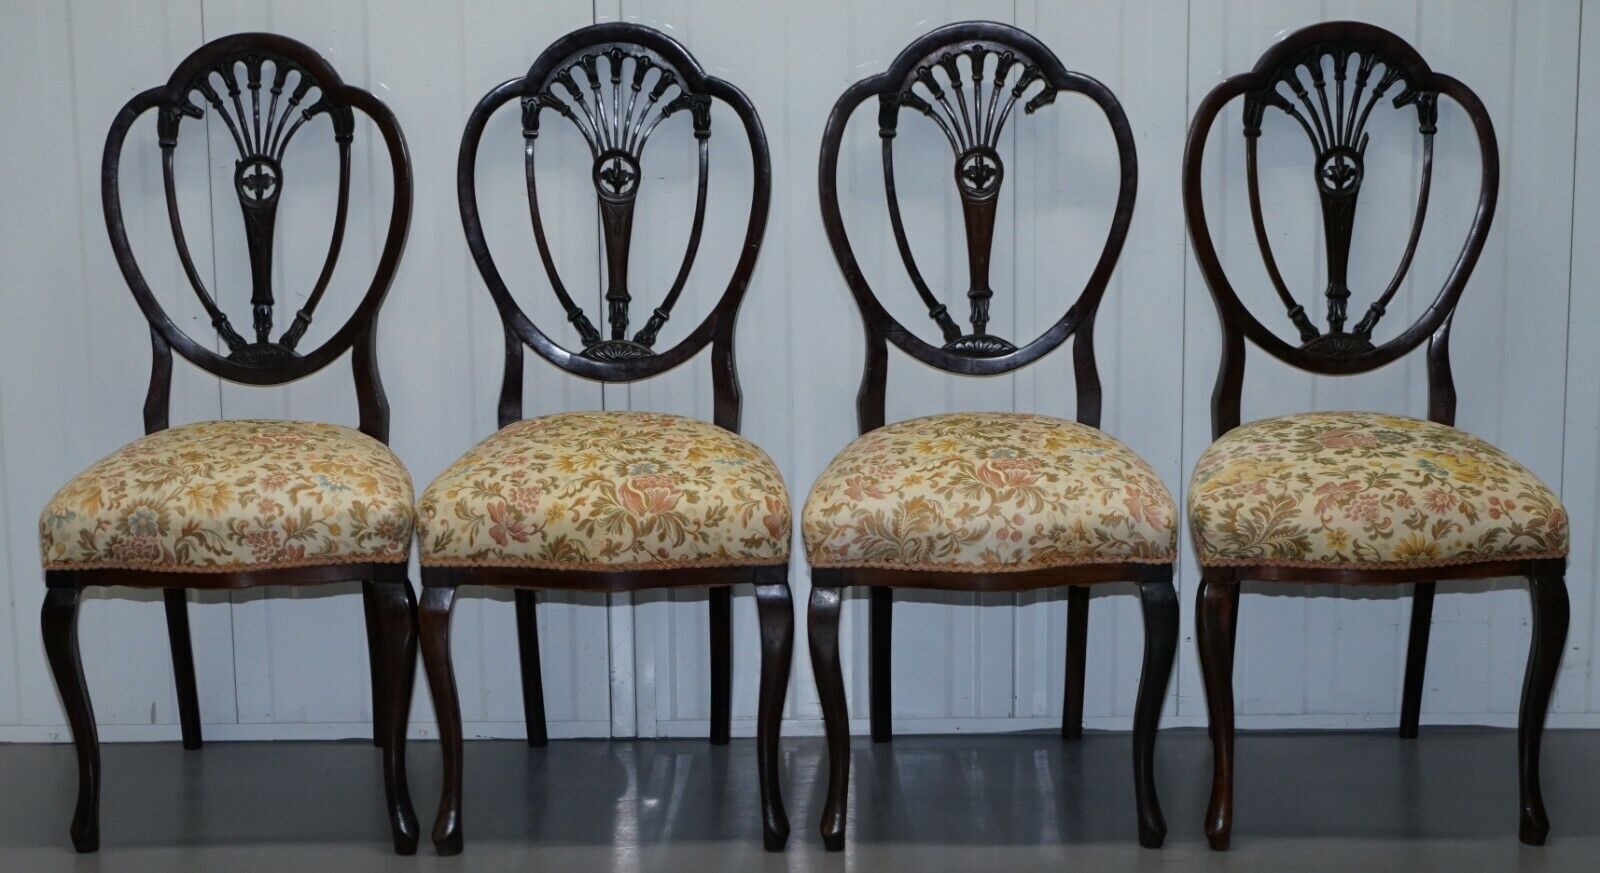 SET OF FOUR VICTORIAN CHAIRS MAHOGANY FLORAL UPHOLSTERY FOR RESTORATION REPAIRS